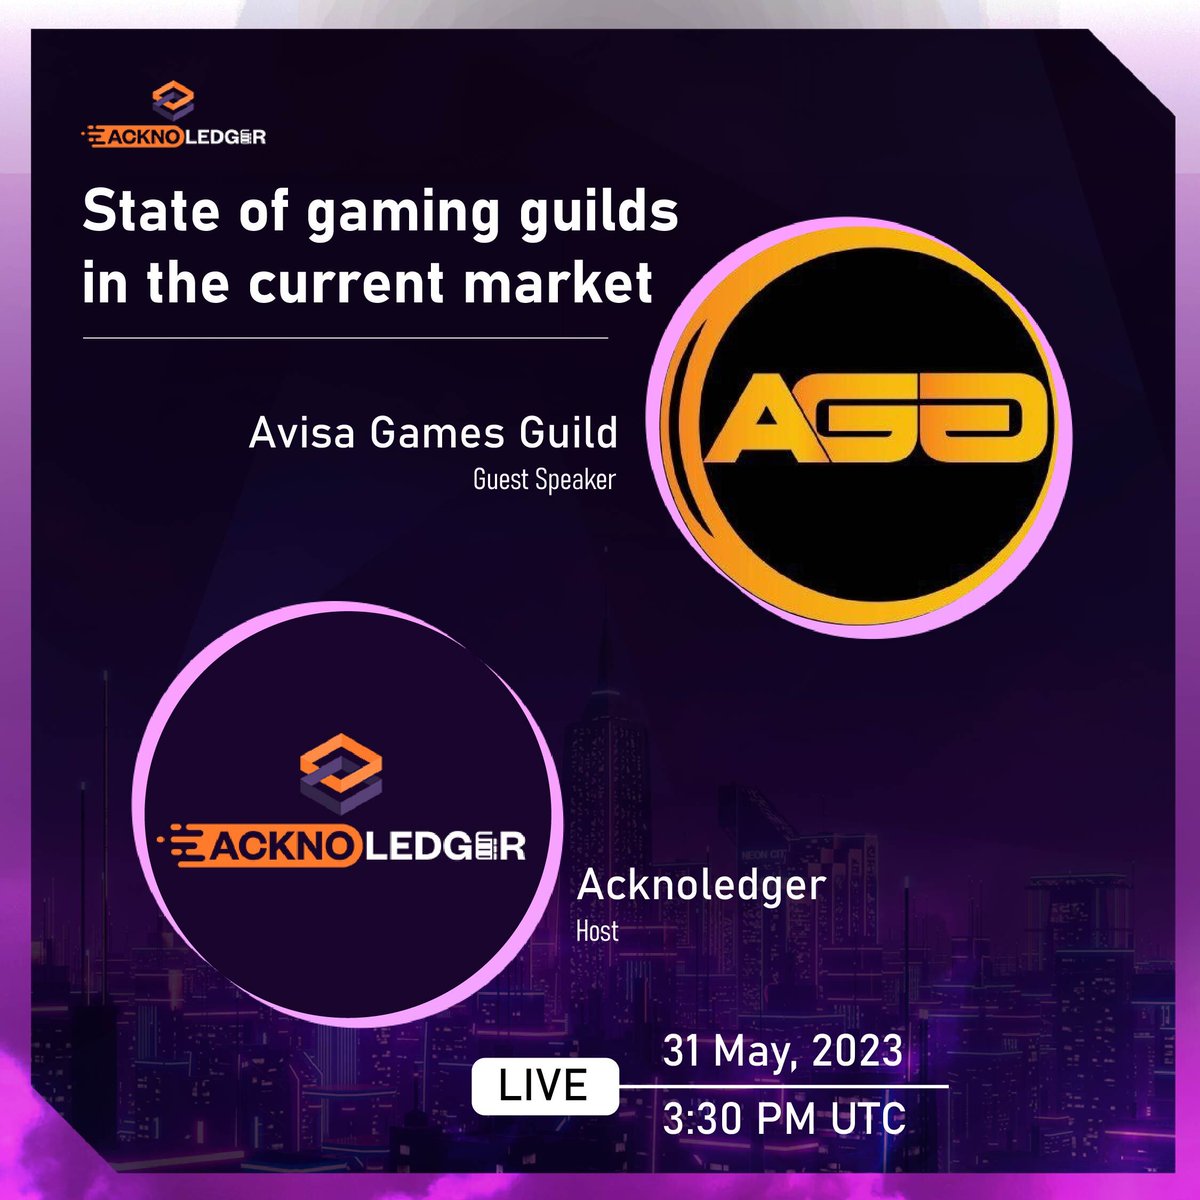 Join us for an exclusive live session with @AvisaGuild as we explore the 'State of Gaming Guilds in the Current Market.' 🚀 Don't miss out on this epic discussion happening today at 3.30 pm UTC! 

#Metaverse #GatewayToMetaverse #Livesession #GamingEnthusiasts